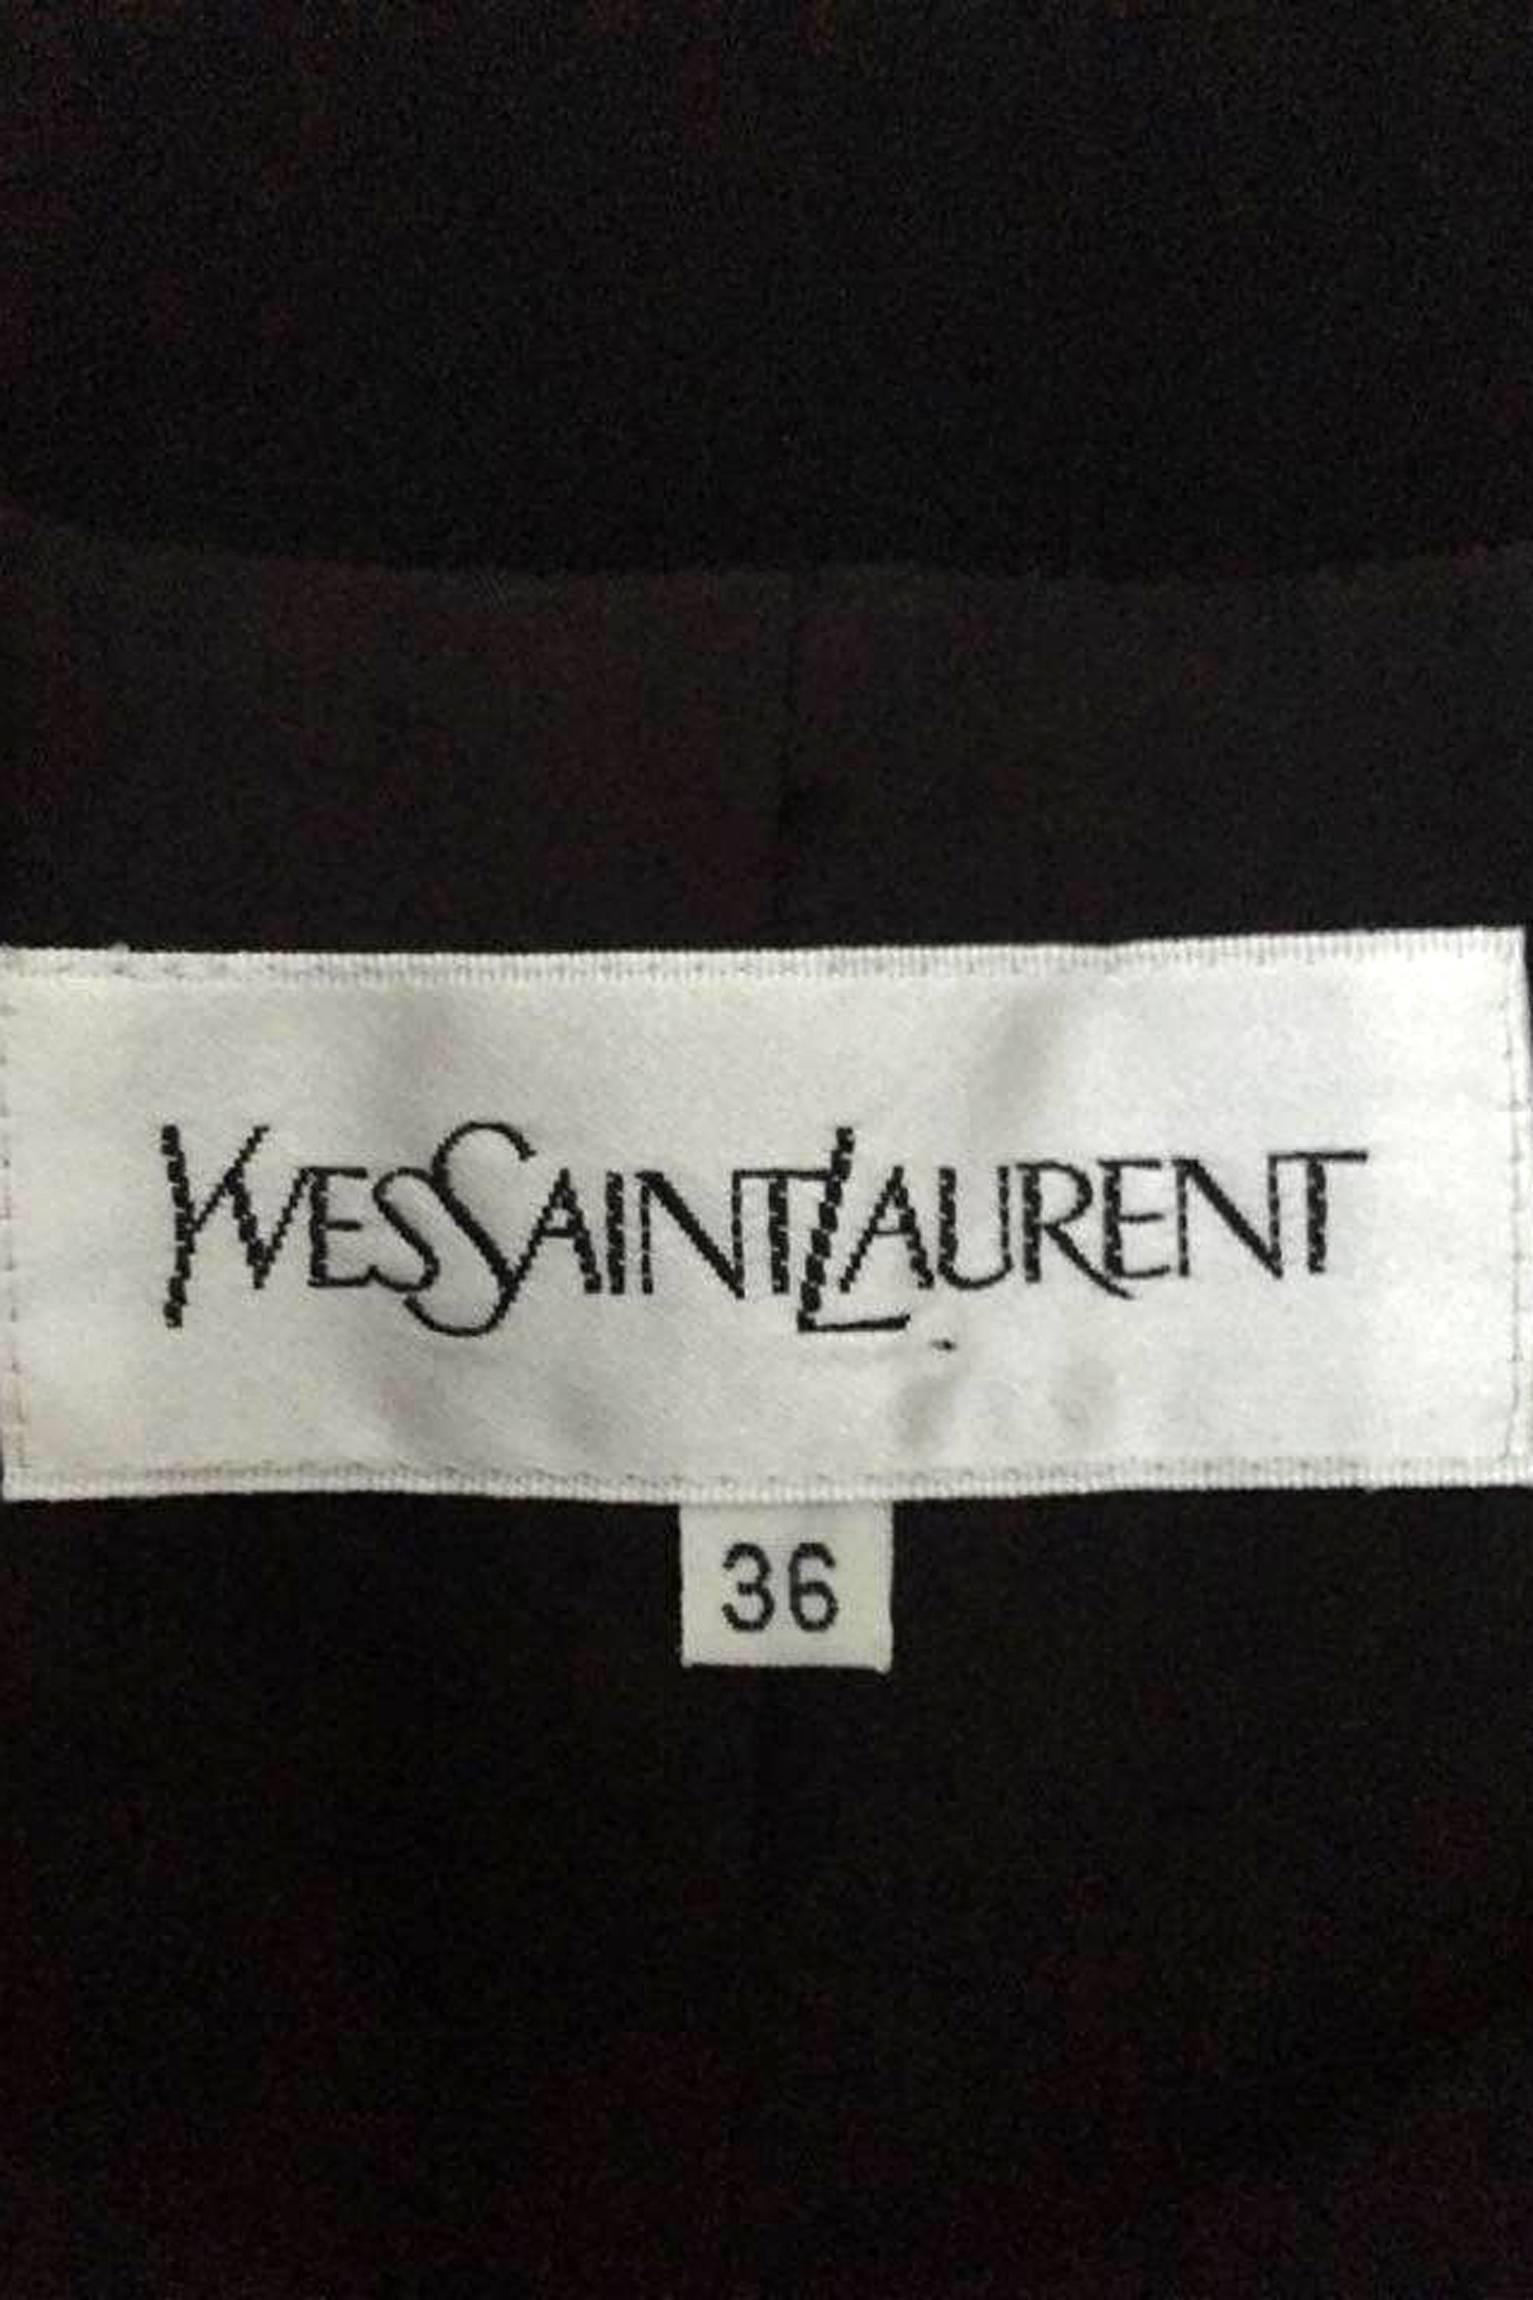 A 90s Yves Saint Laurent black wool dress with structured shoulders, a flared skirt and tapered sleeves. The dress is fully lined and has a pocket situated on each side of the lowered waistline and a single mock pocket on the left side of the bust.